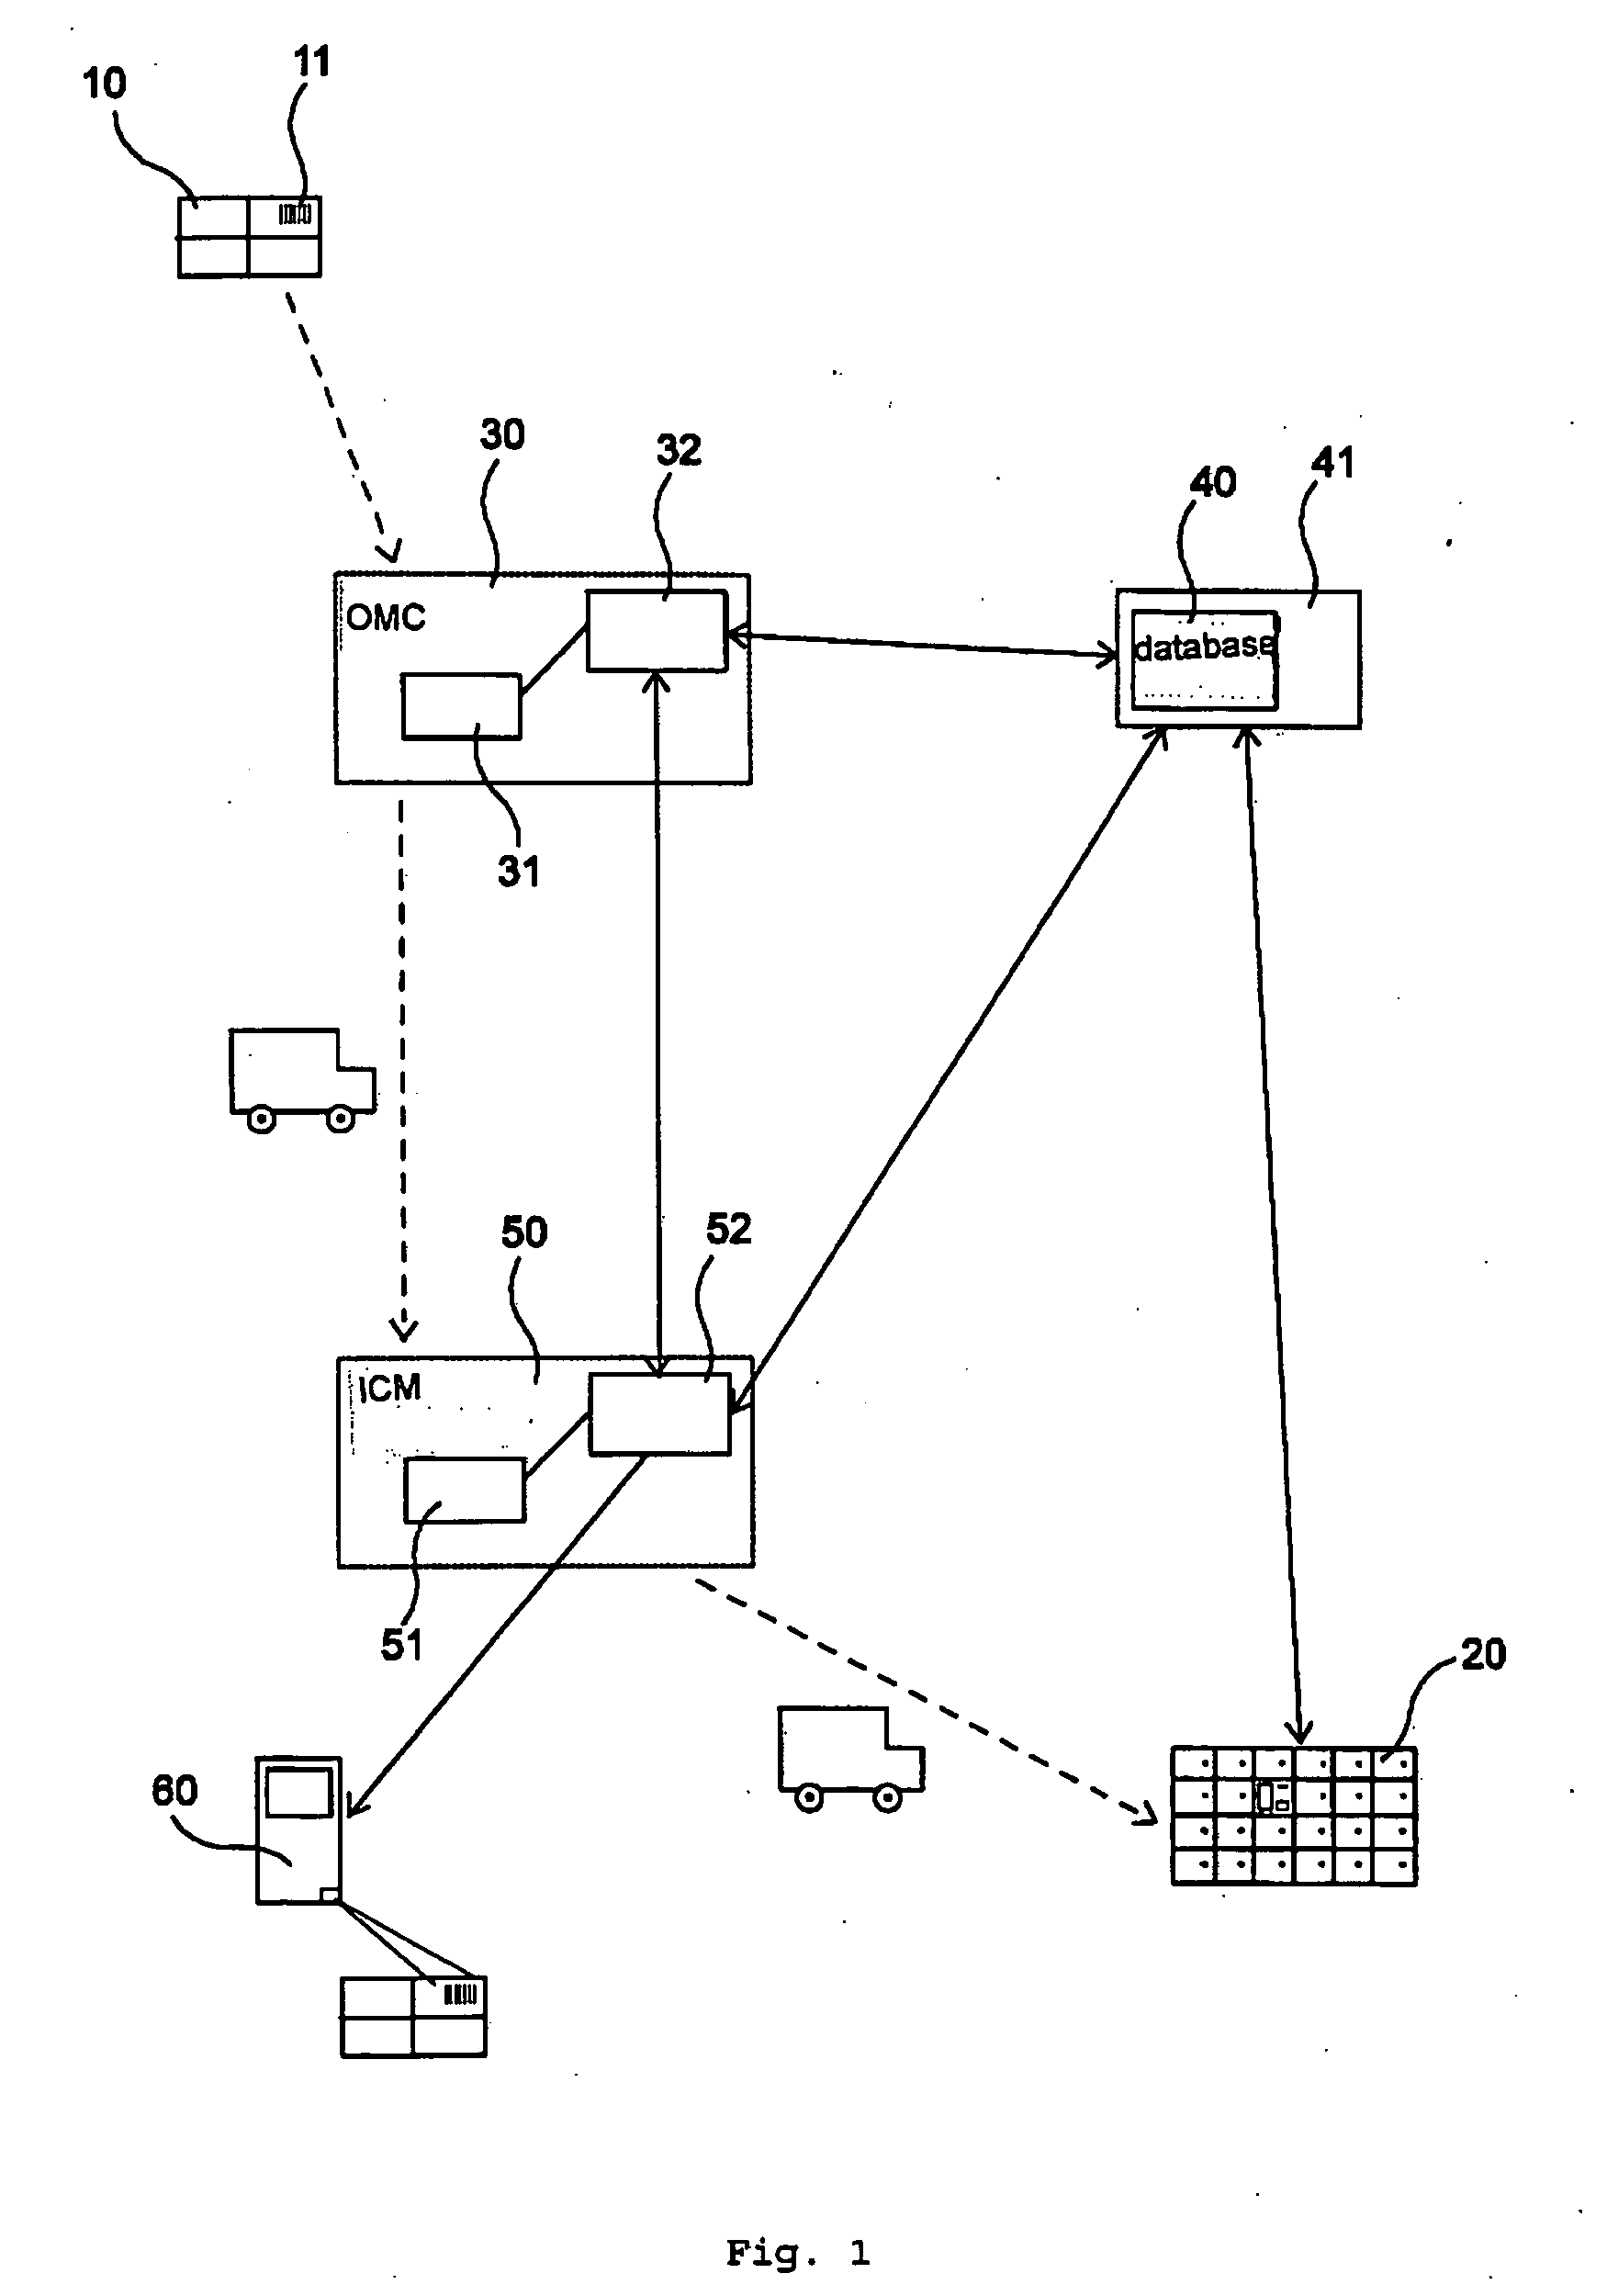 Method and arrangement of devices for processing mail items addressed to post office box systems within a postal transportation and mail distriburion system